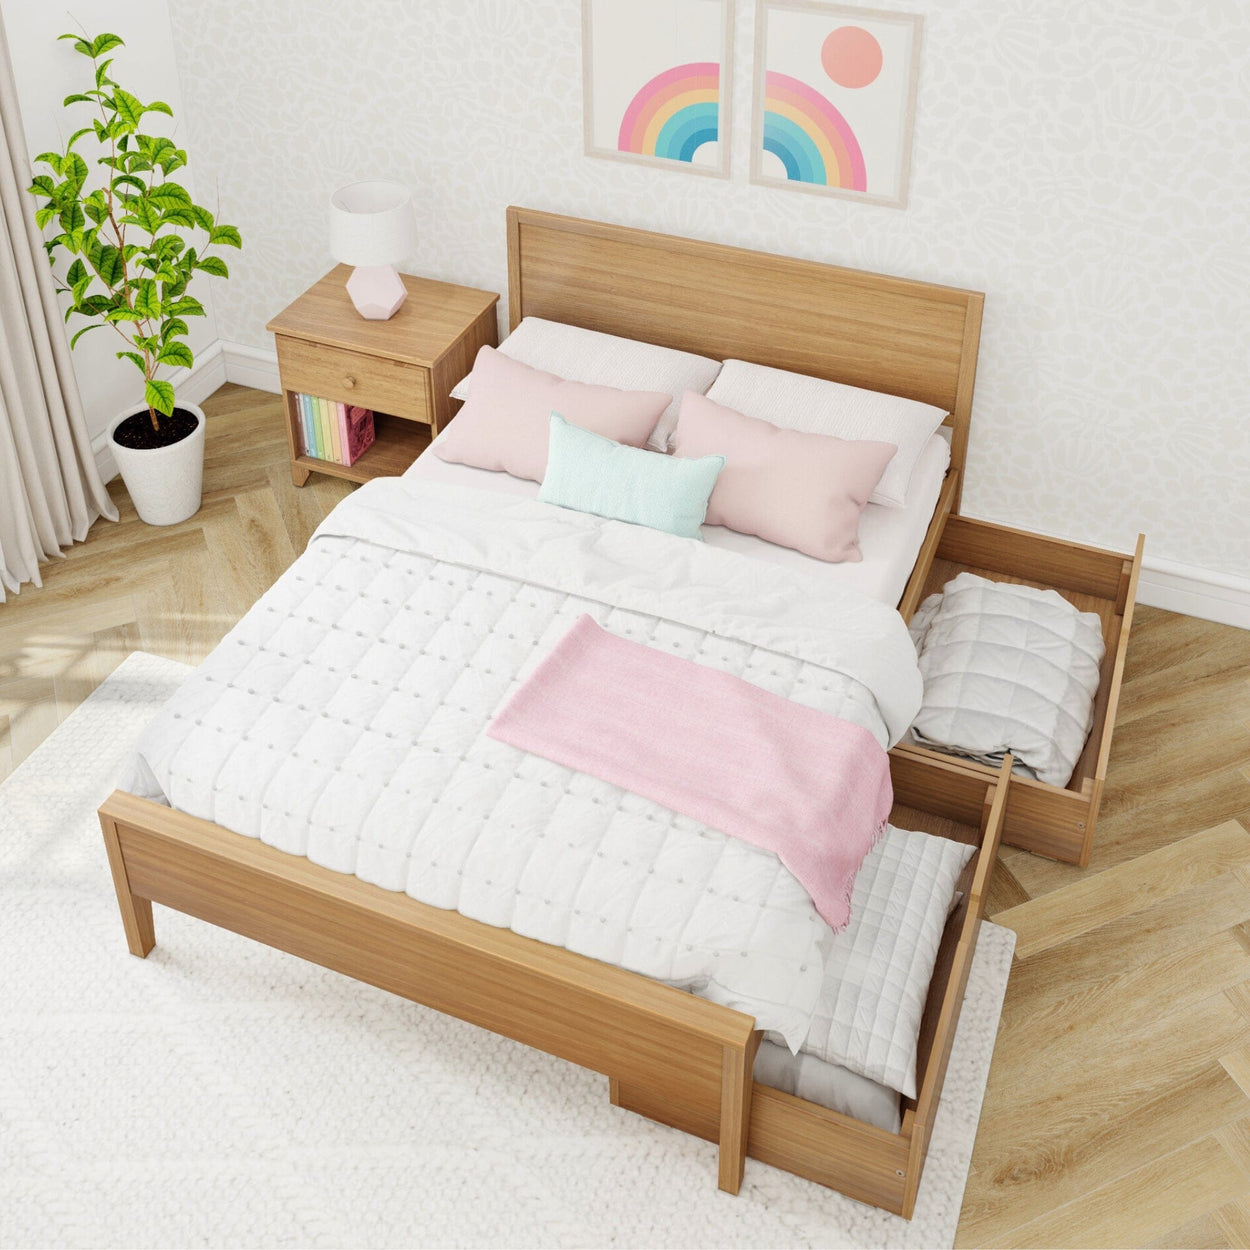 187101-007 : Kids Beds Classic Full-Size Bed with Panel Headboard and Storage Drawers, Pecan